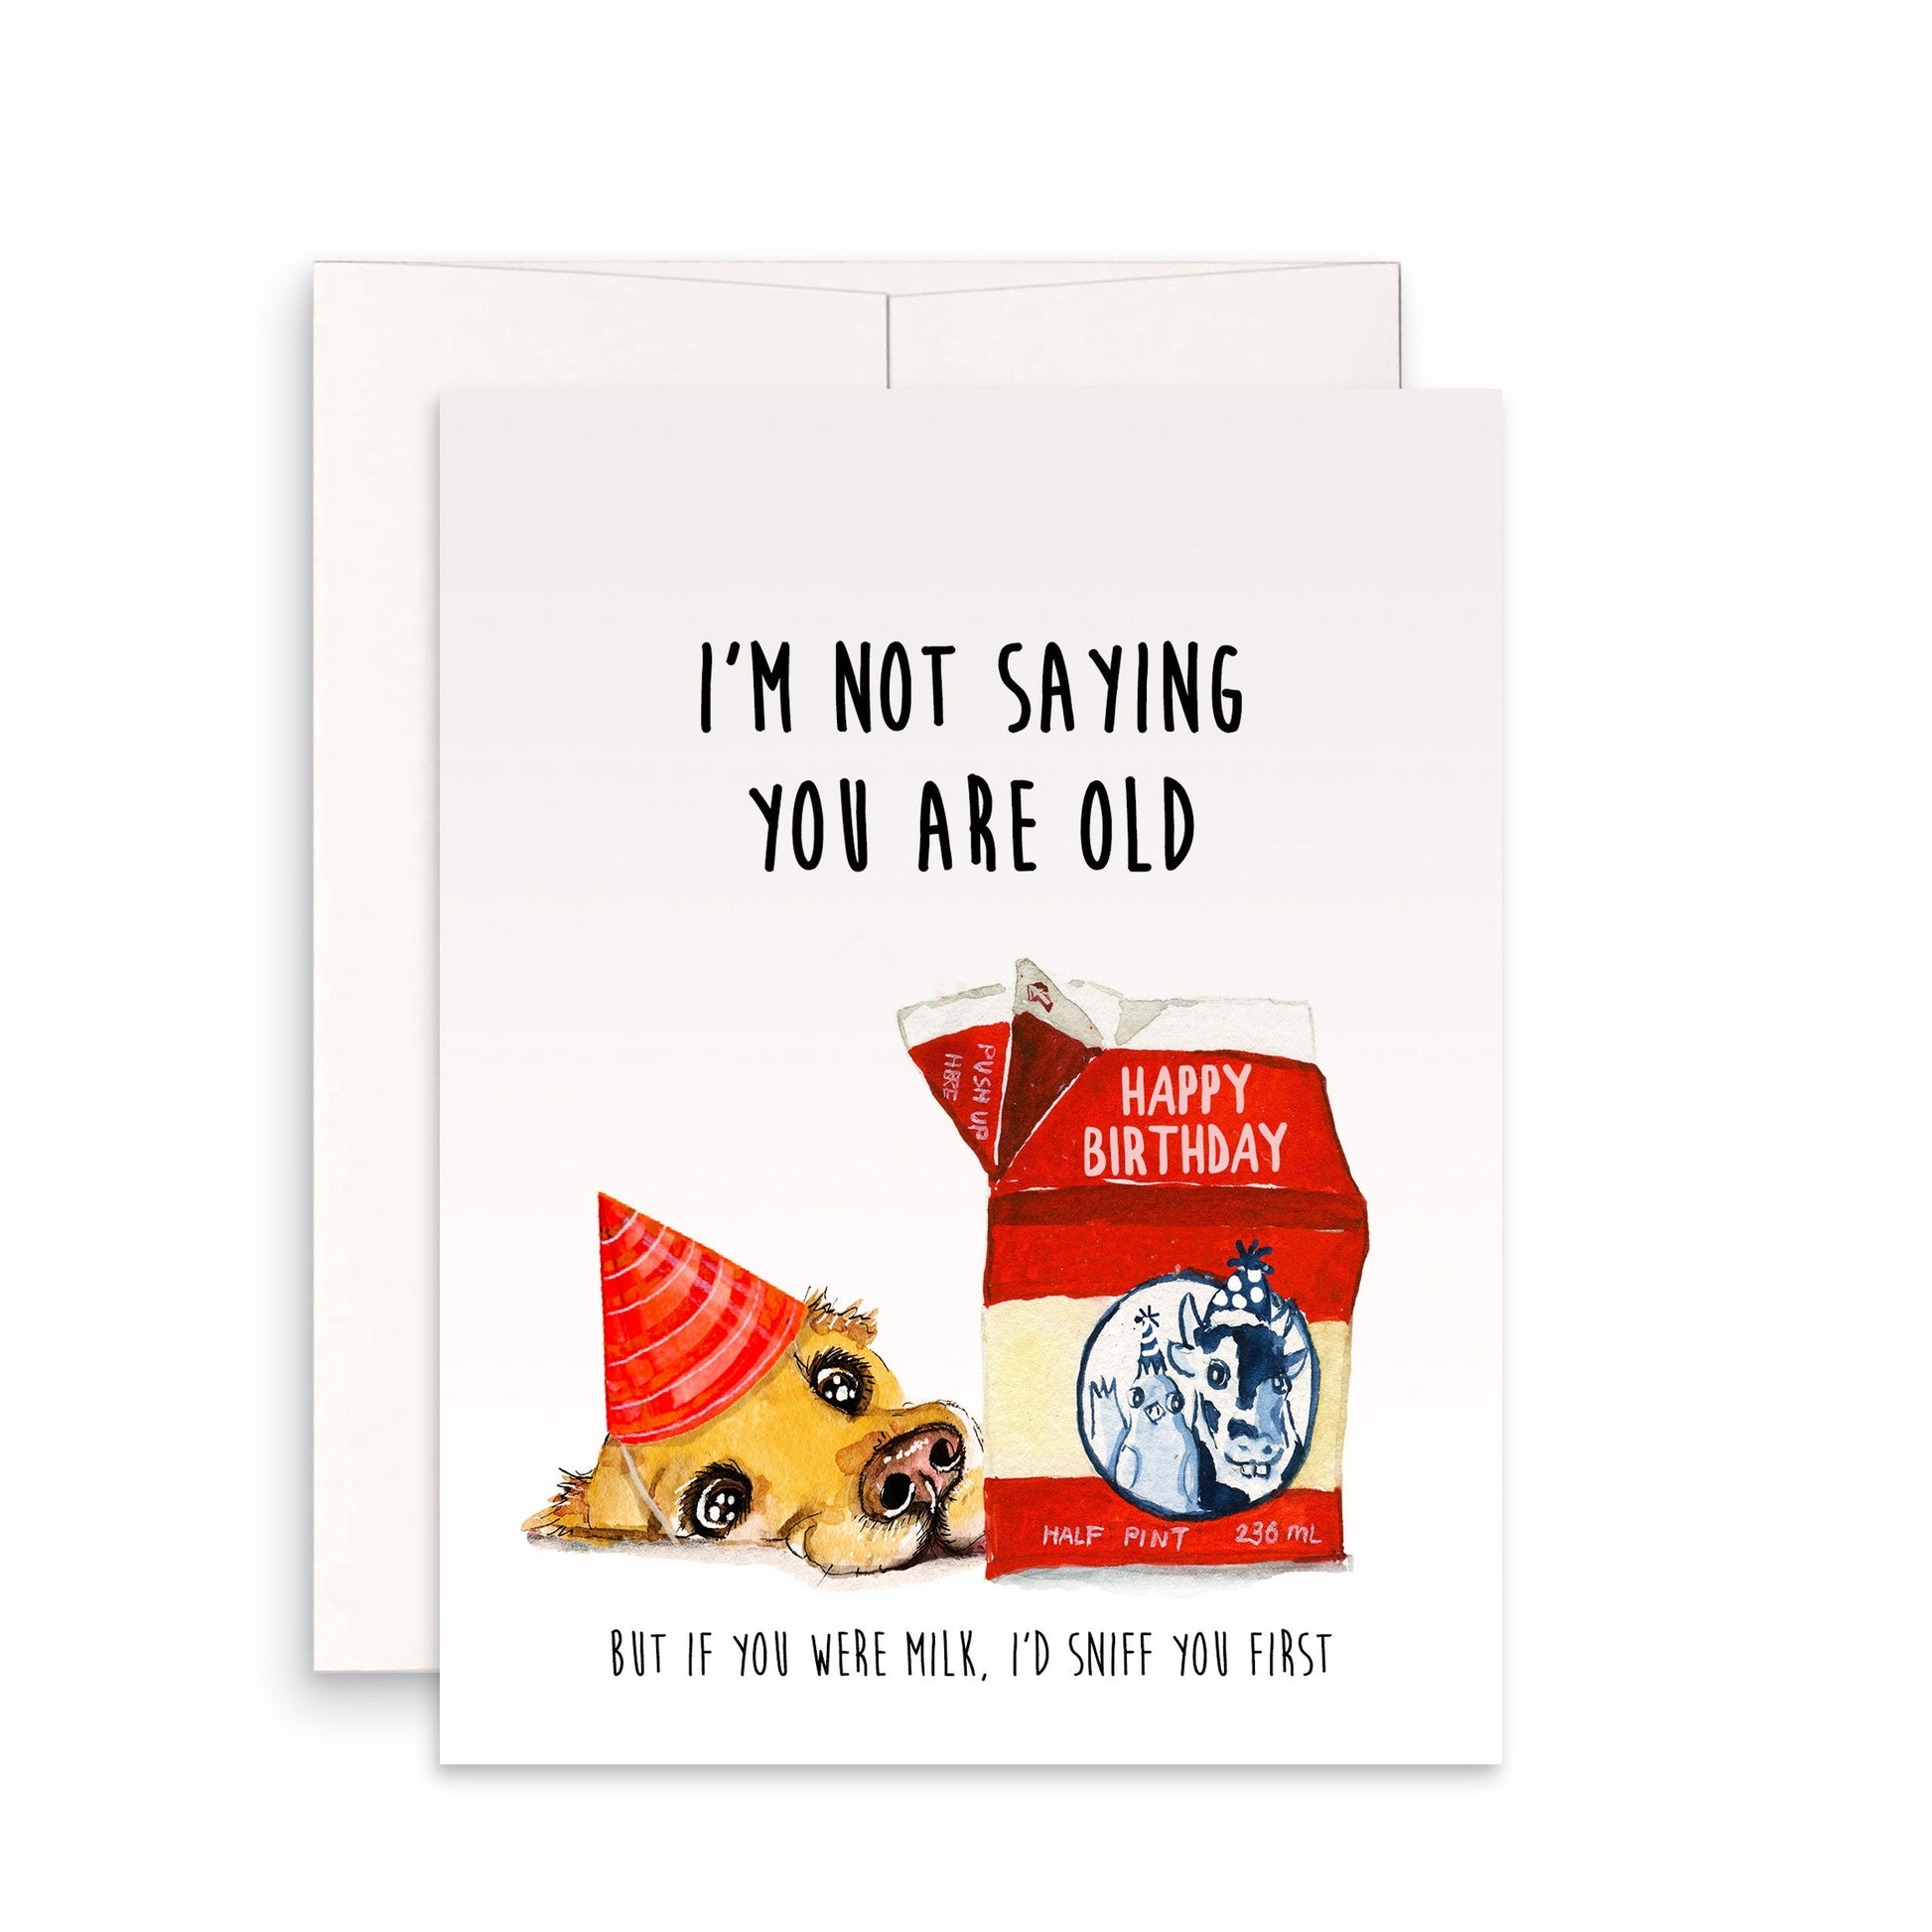 Old Milk Rude Birthday Card Funny - Not Saying You Are Old - Golden Retriever Dog Birthday Cards From The Dog